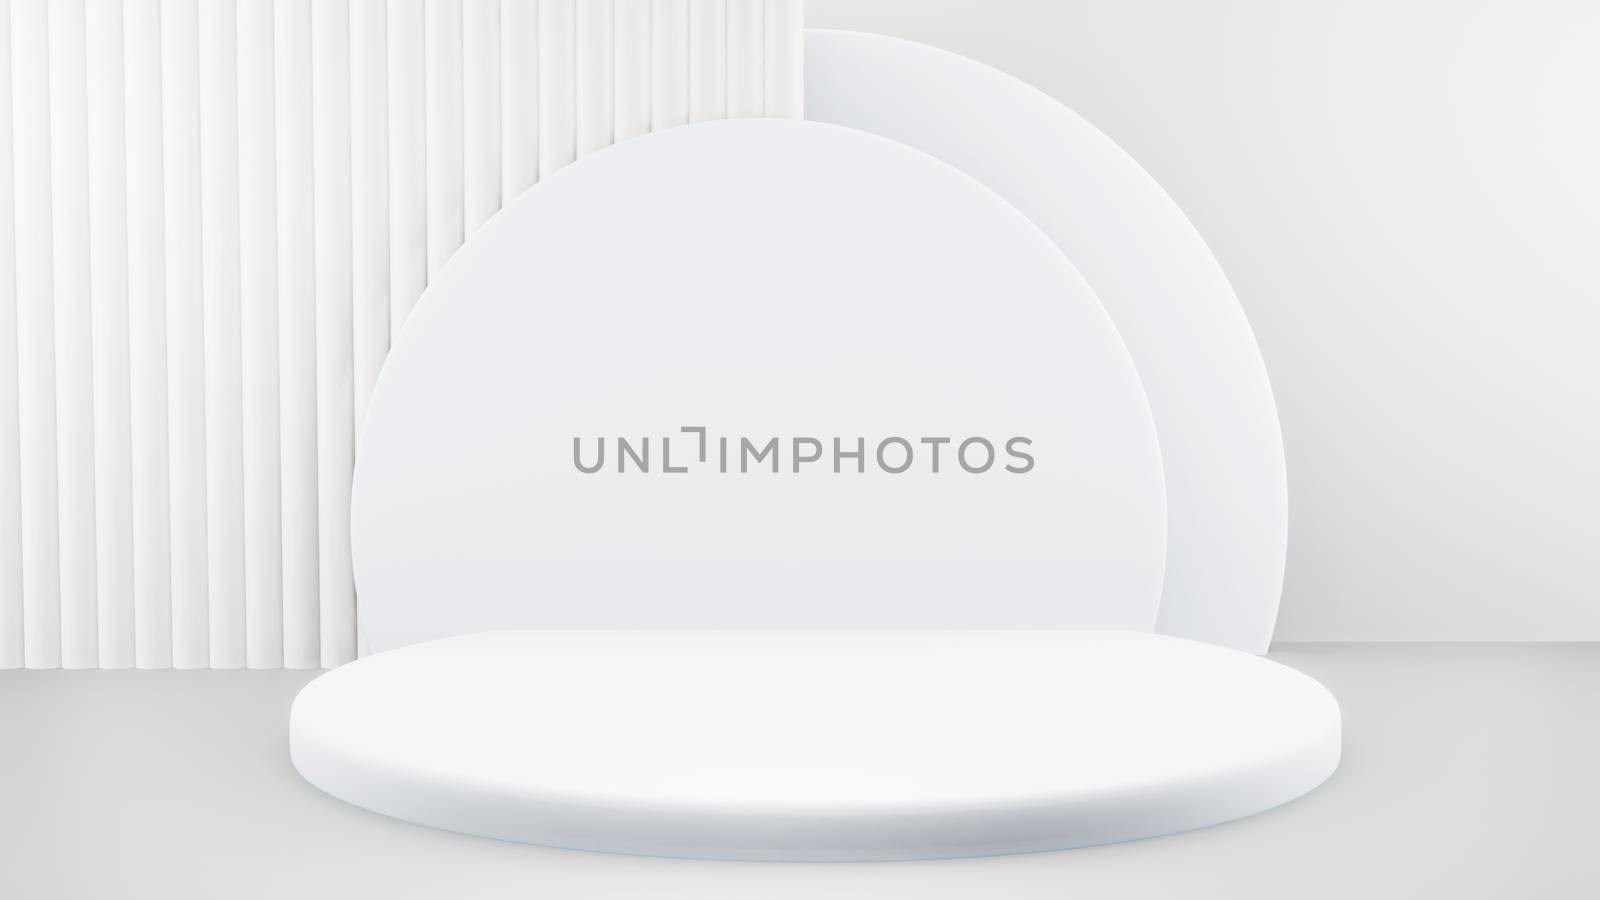 Podium in abstract white composition for product presentation, 3d render, 3d illustration.